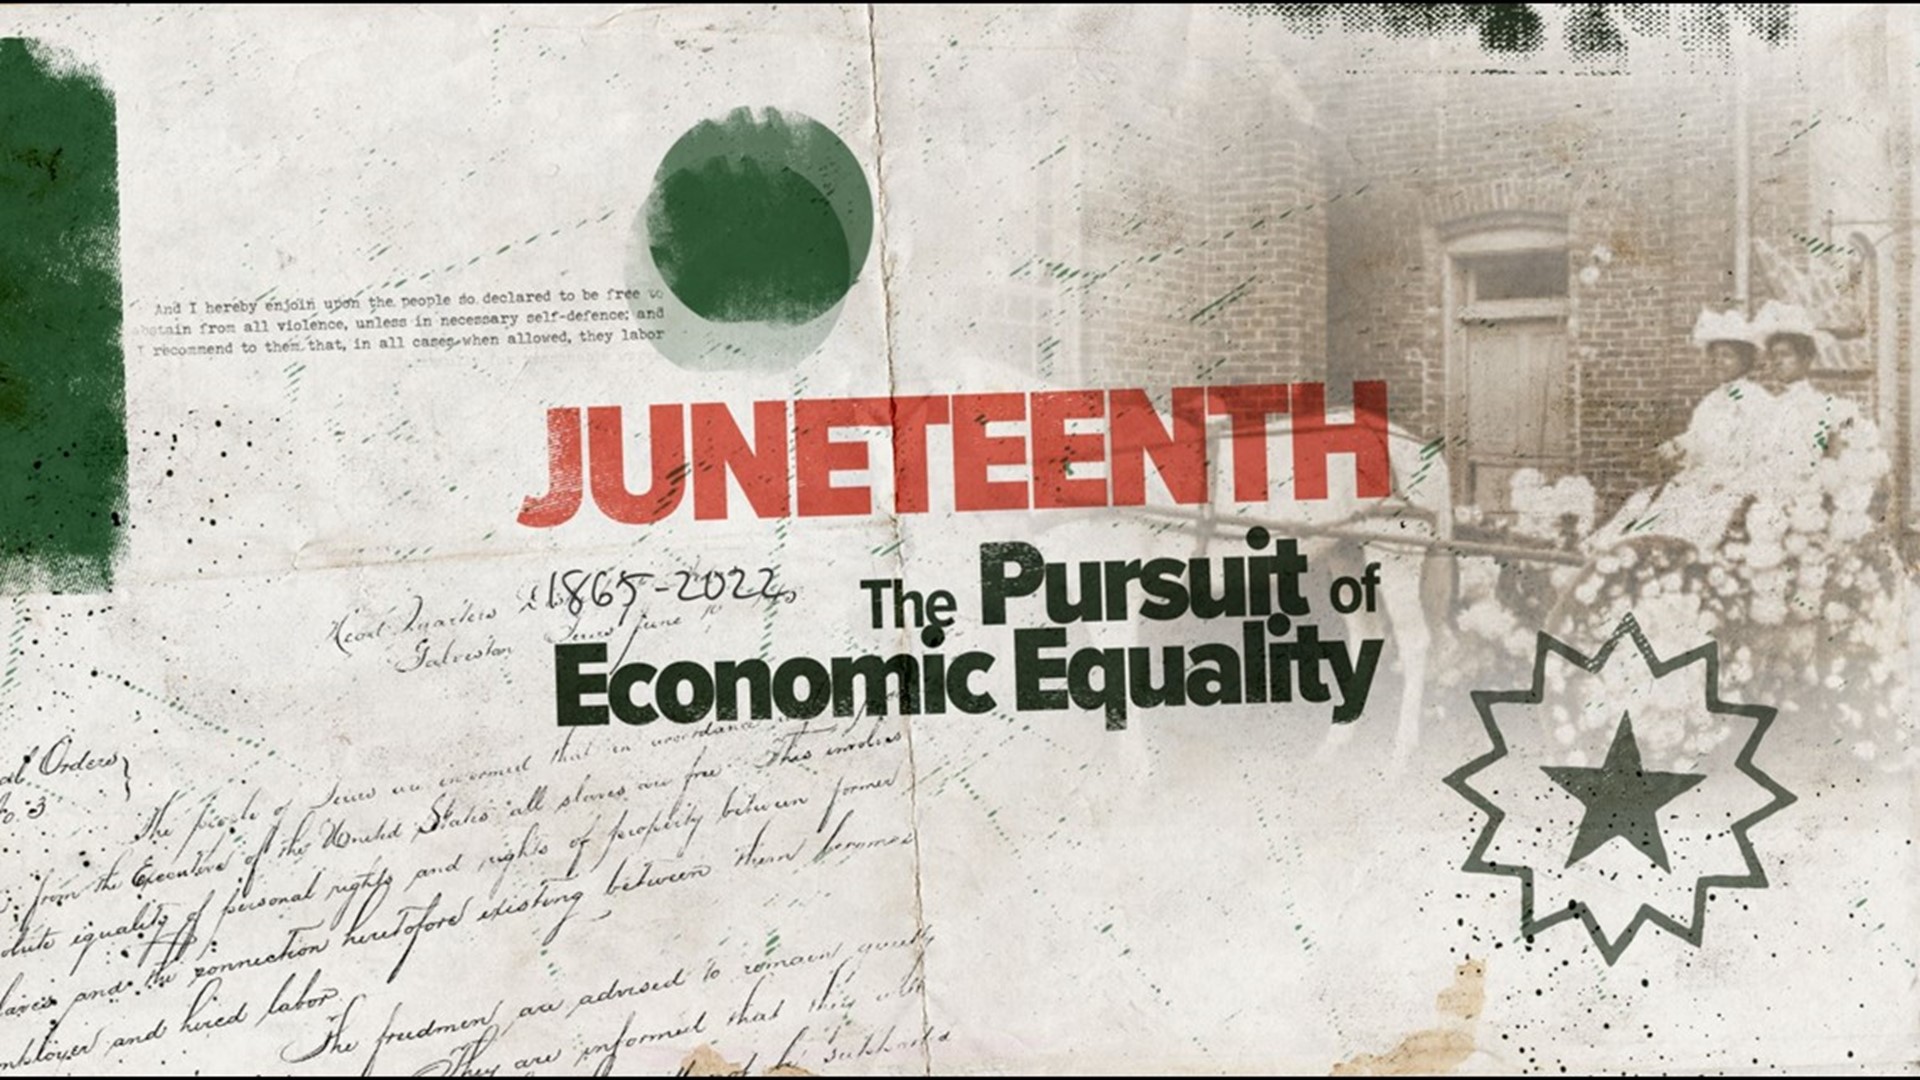 KHOU 11's second Juneteenth documentary, "Juneteenth: The Pursuit of Economic Equality," highlights the lasting financial impact of Juneteenth on Black Americans.